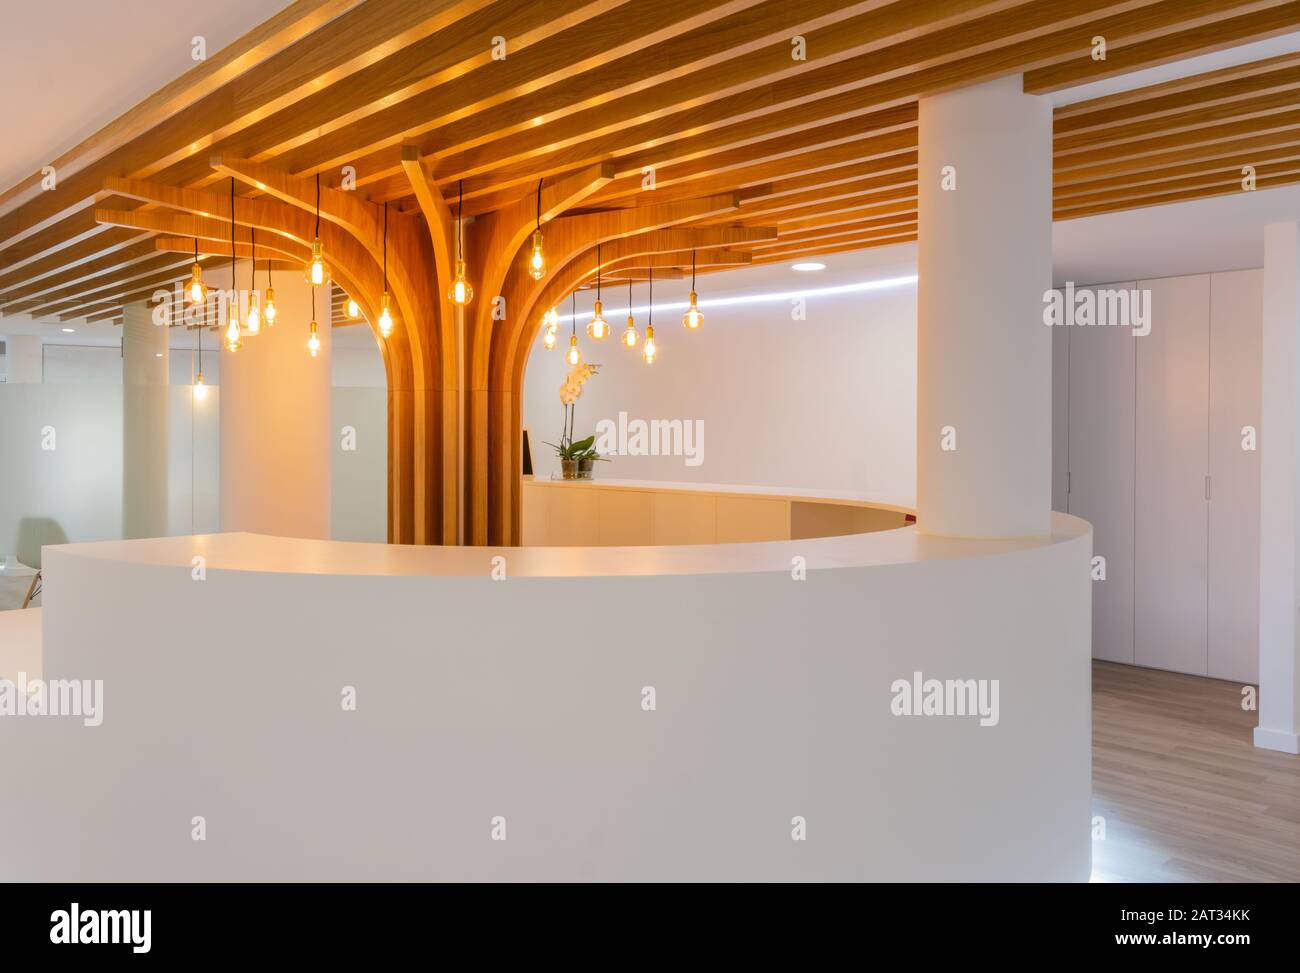 A Reception Of Modern Office With Lights And Wood On The Ceiling